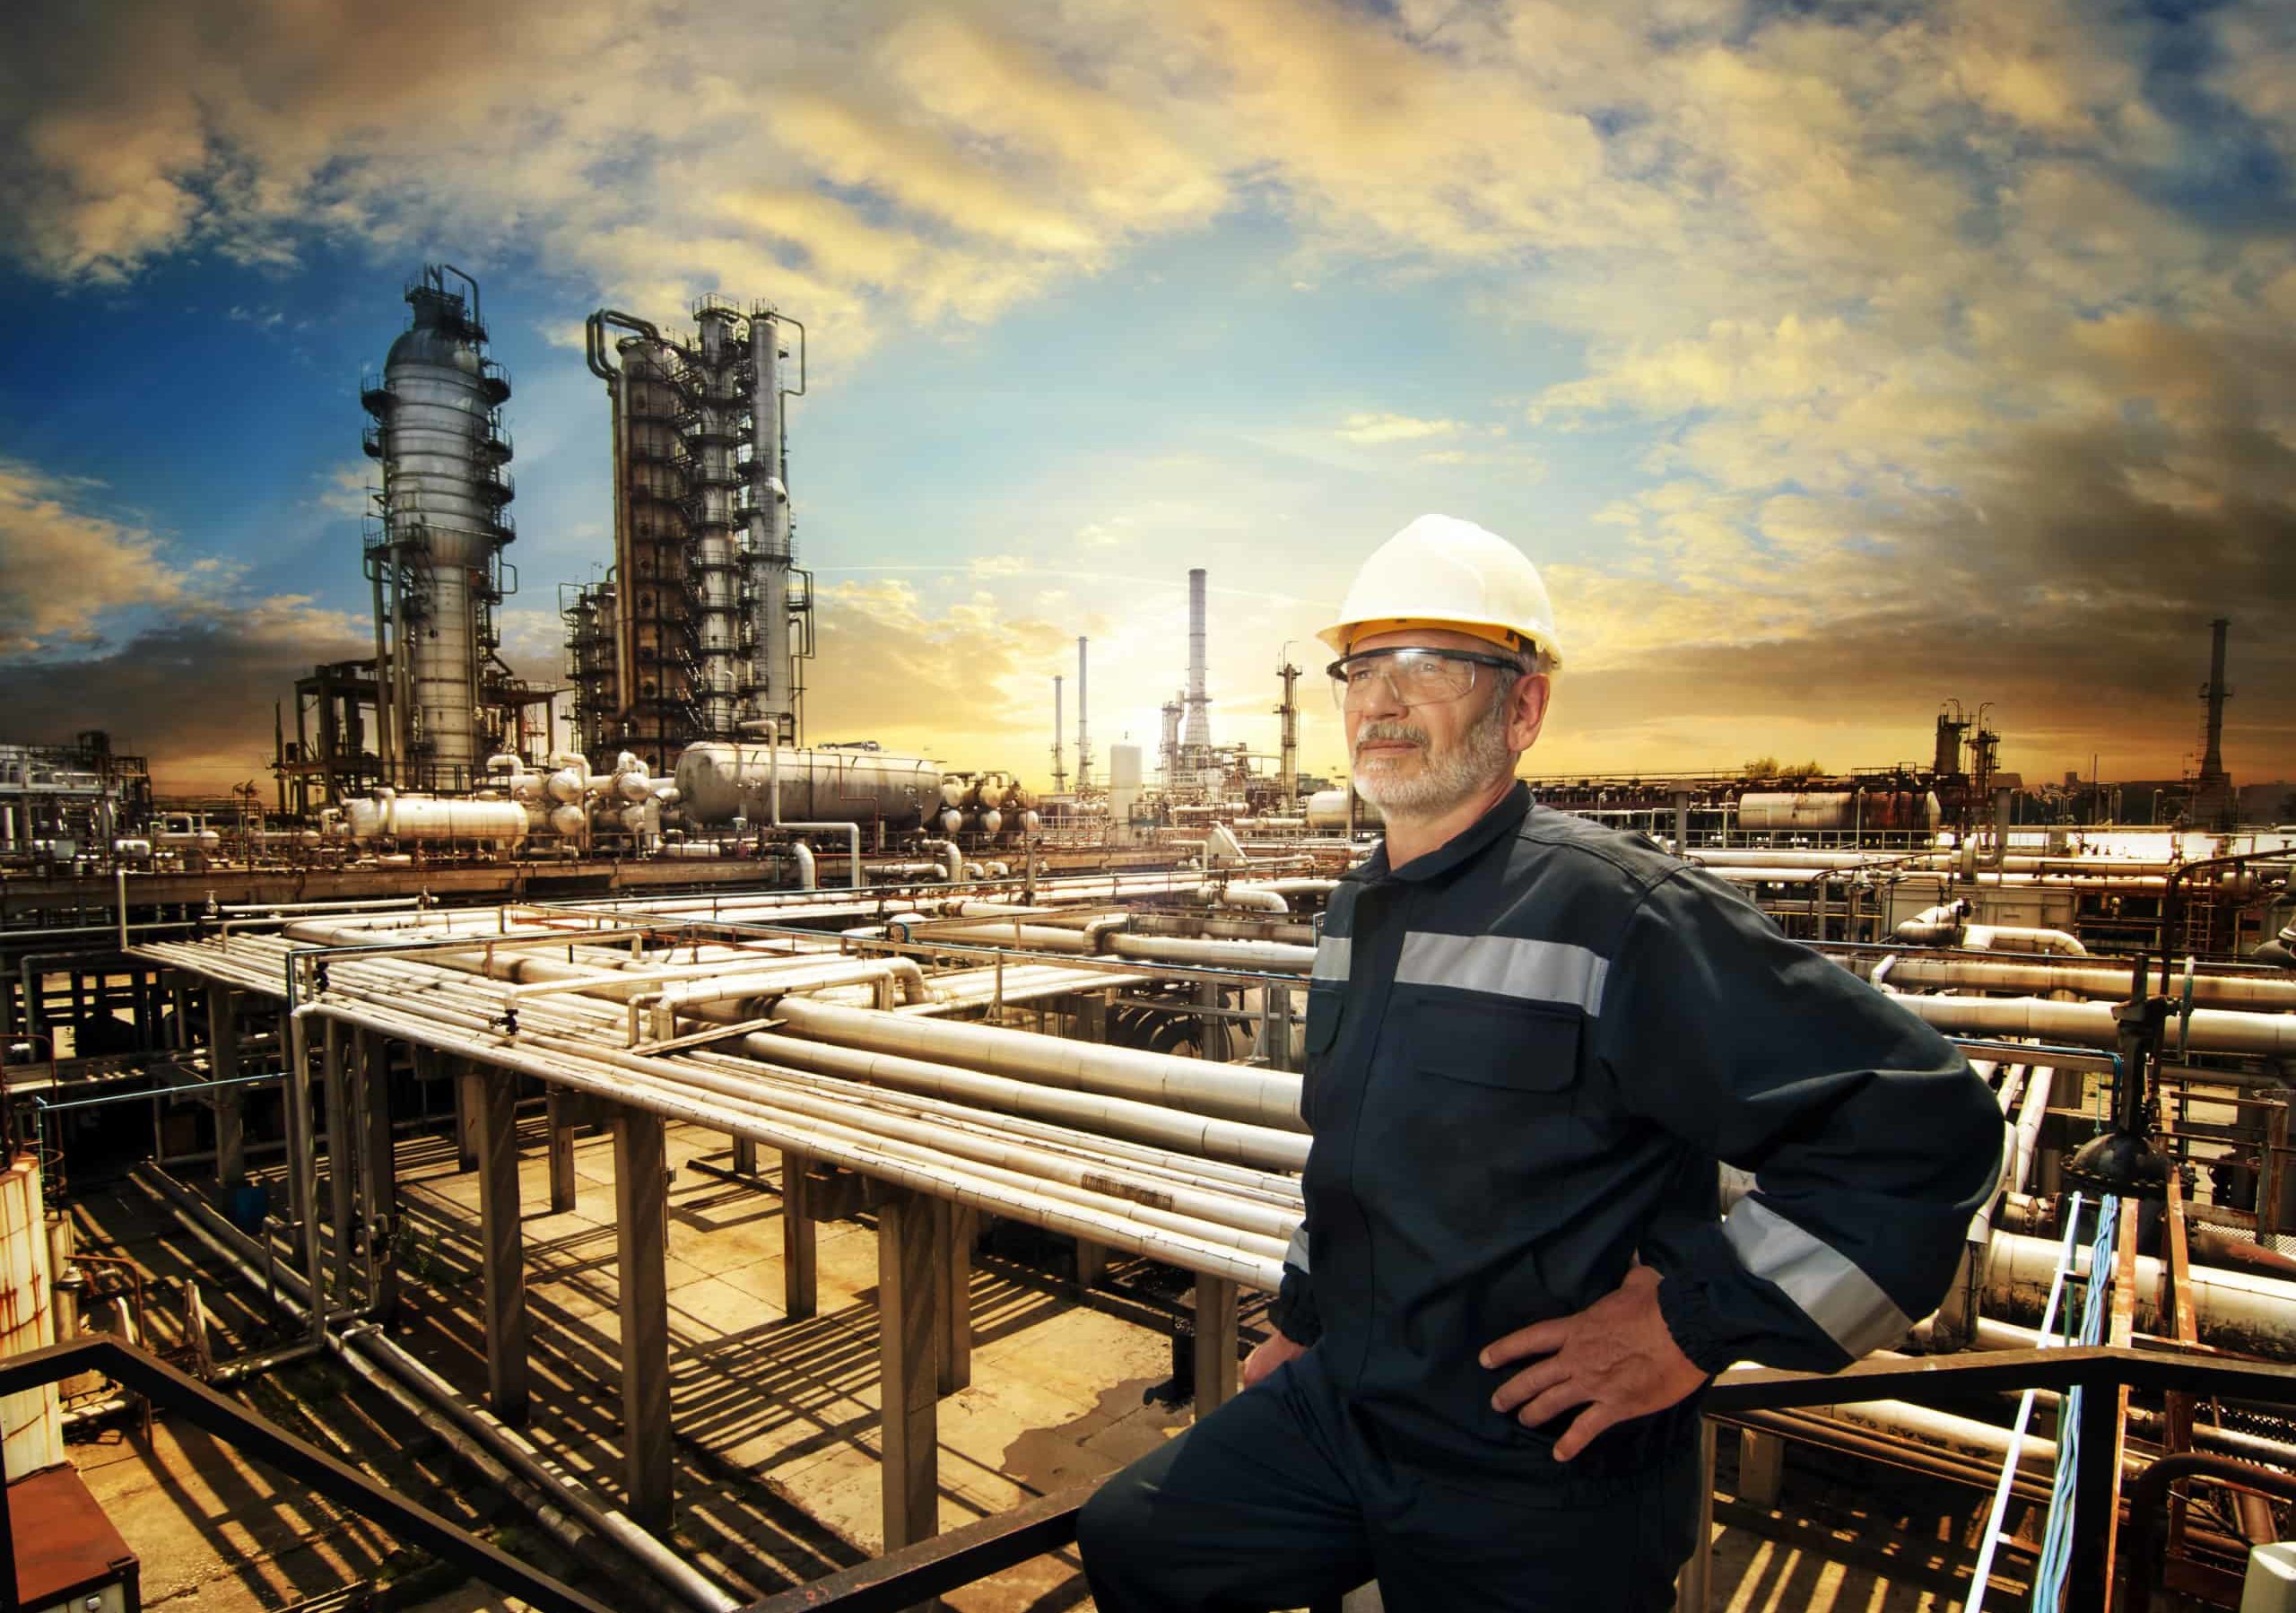 Experienced engineer overlooking oil refinery plant in a sunset, dramatic sky colors